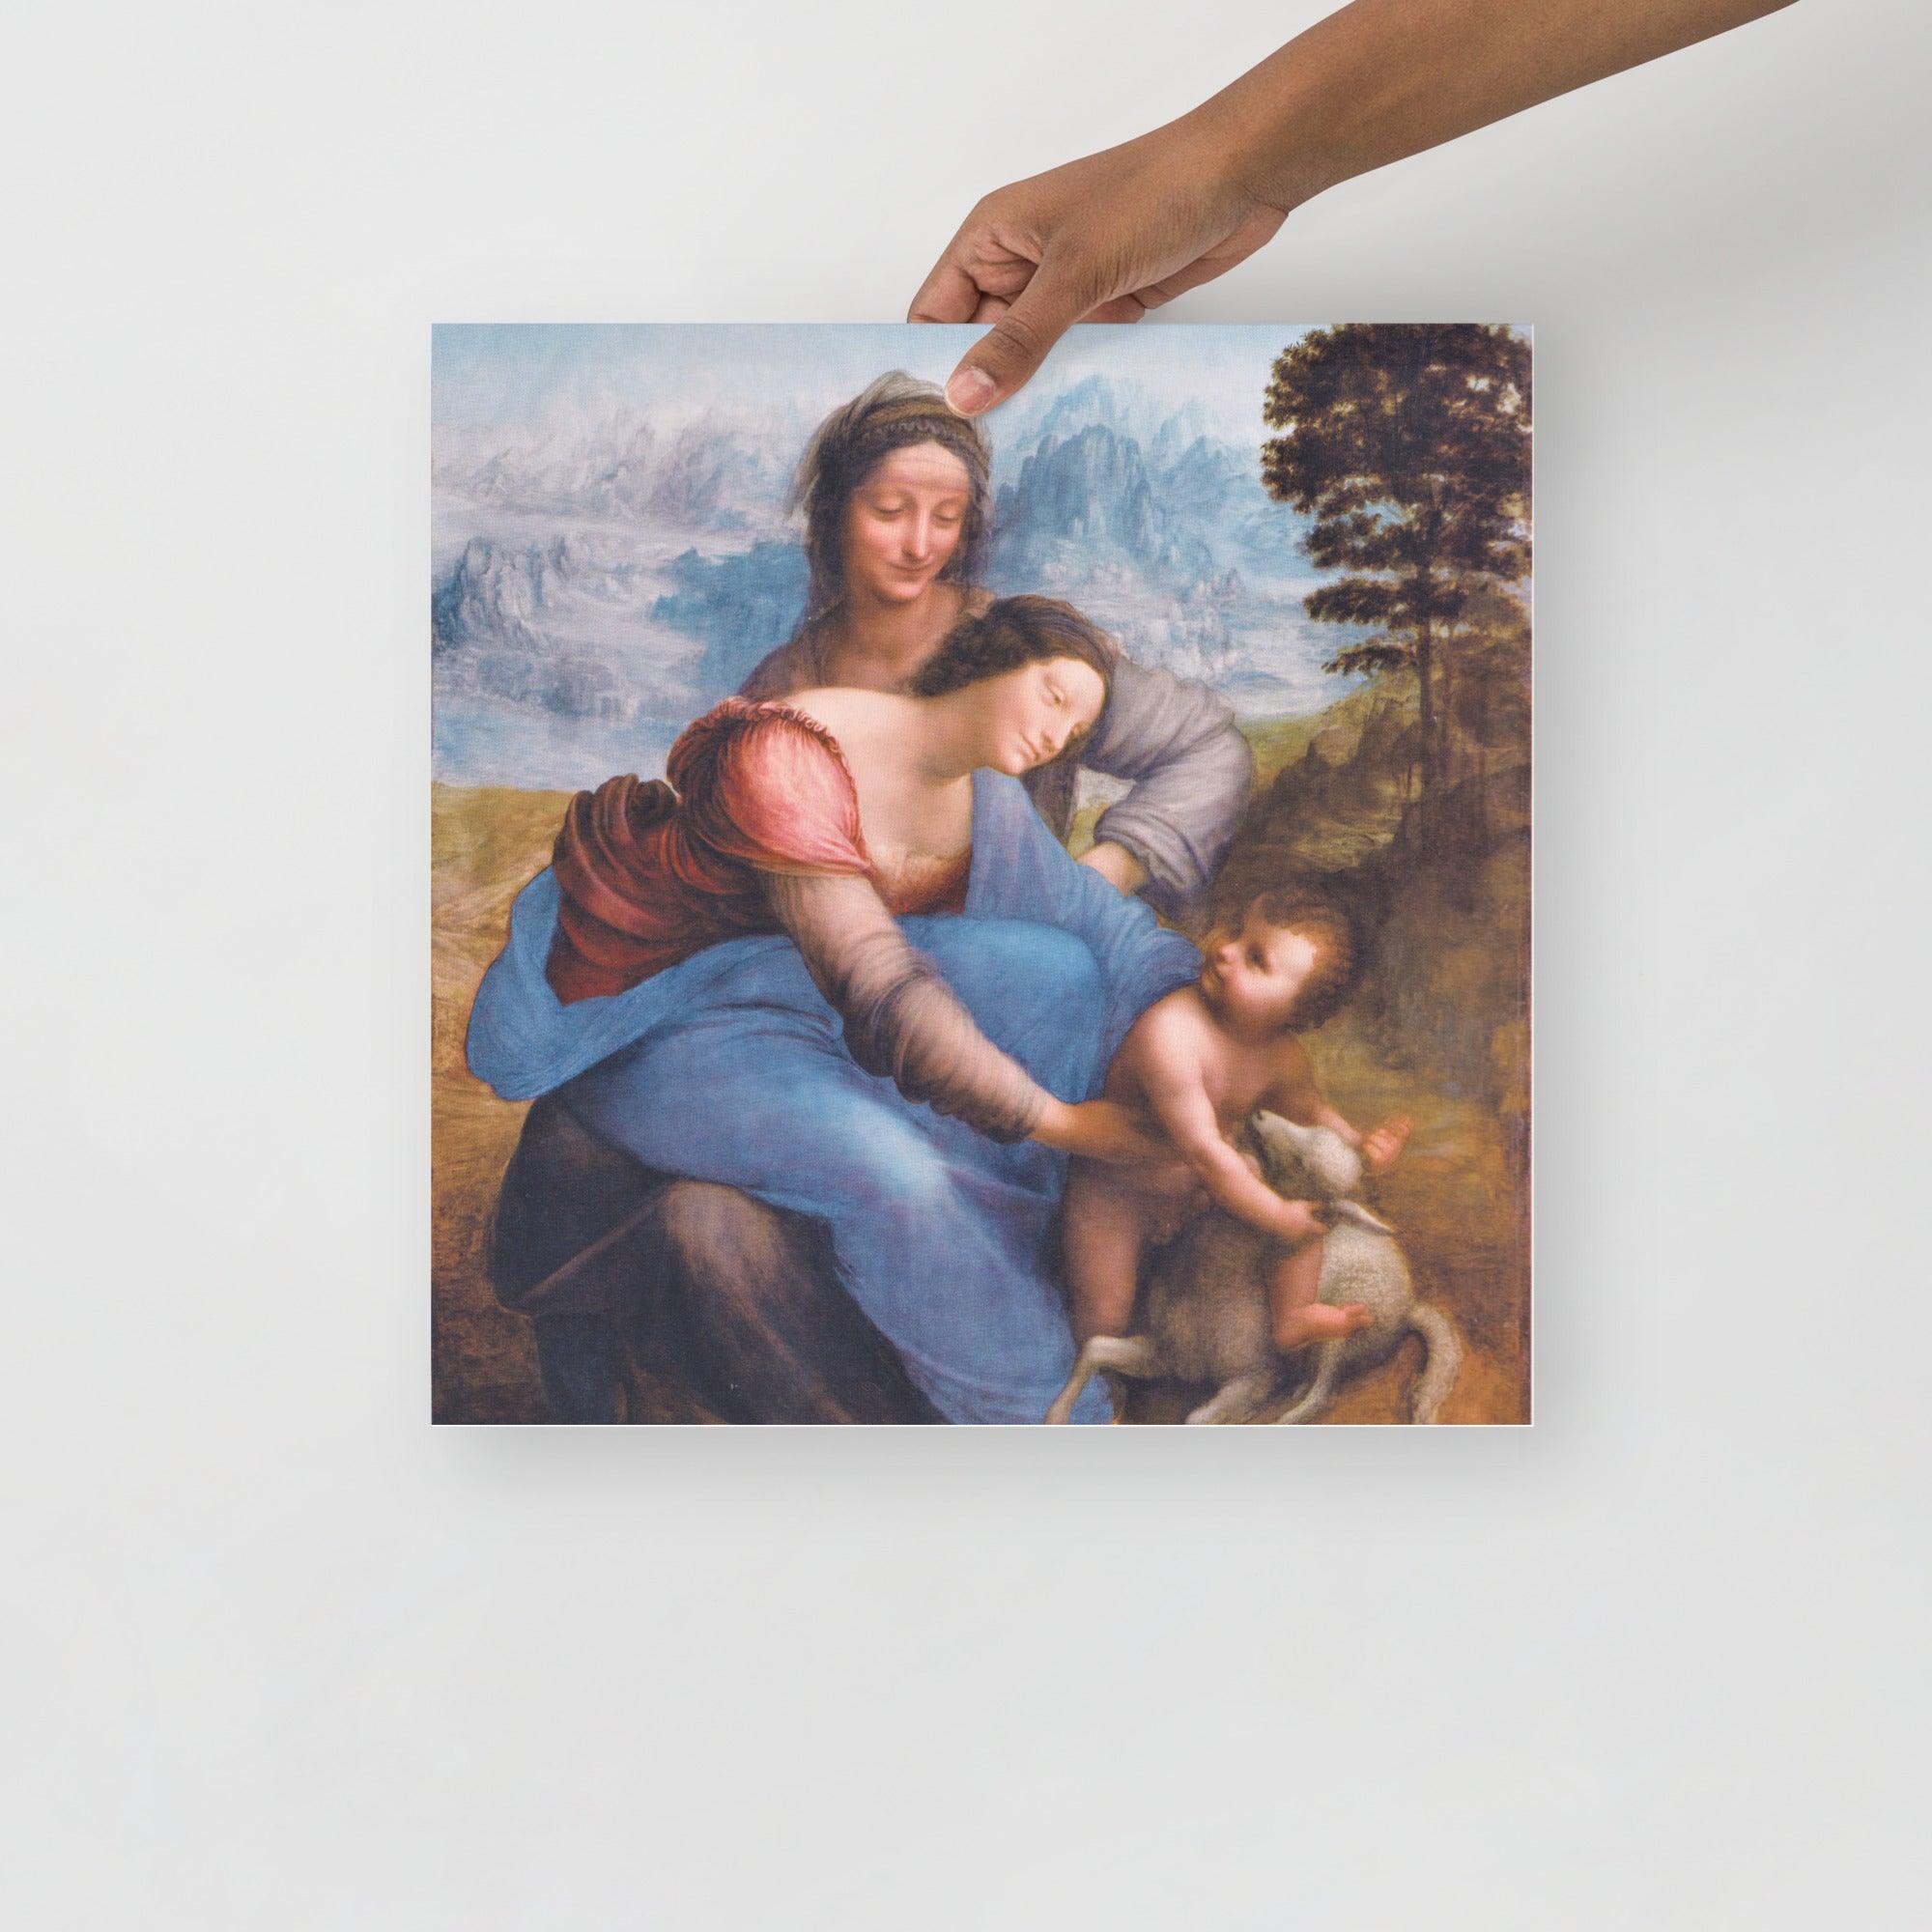 The Virgin and Child with Saint Anne by Leonardo da Vinci poster on a plain backdrop in size 16x16”.